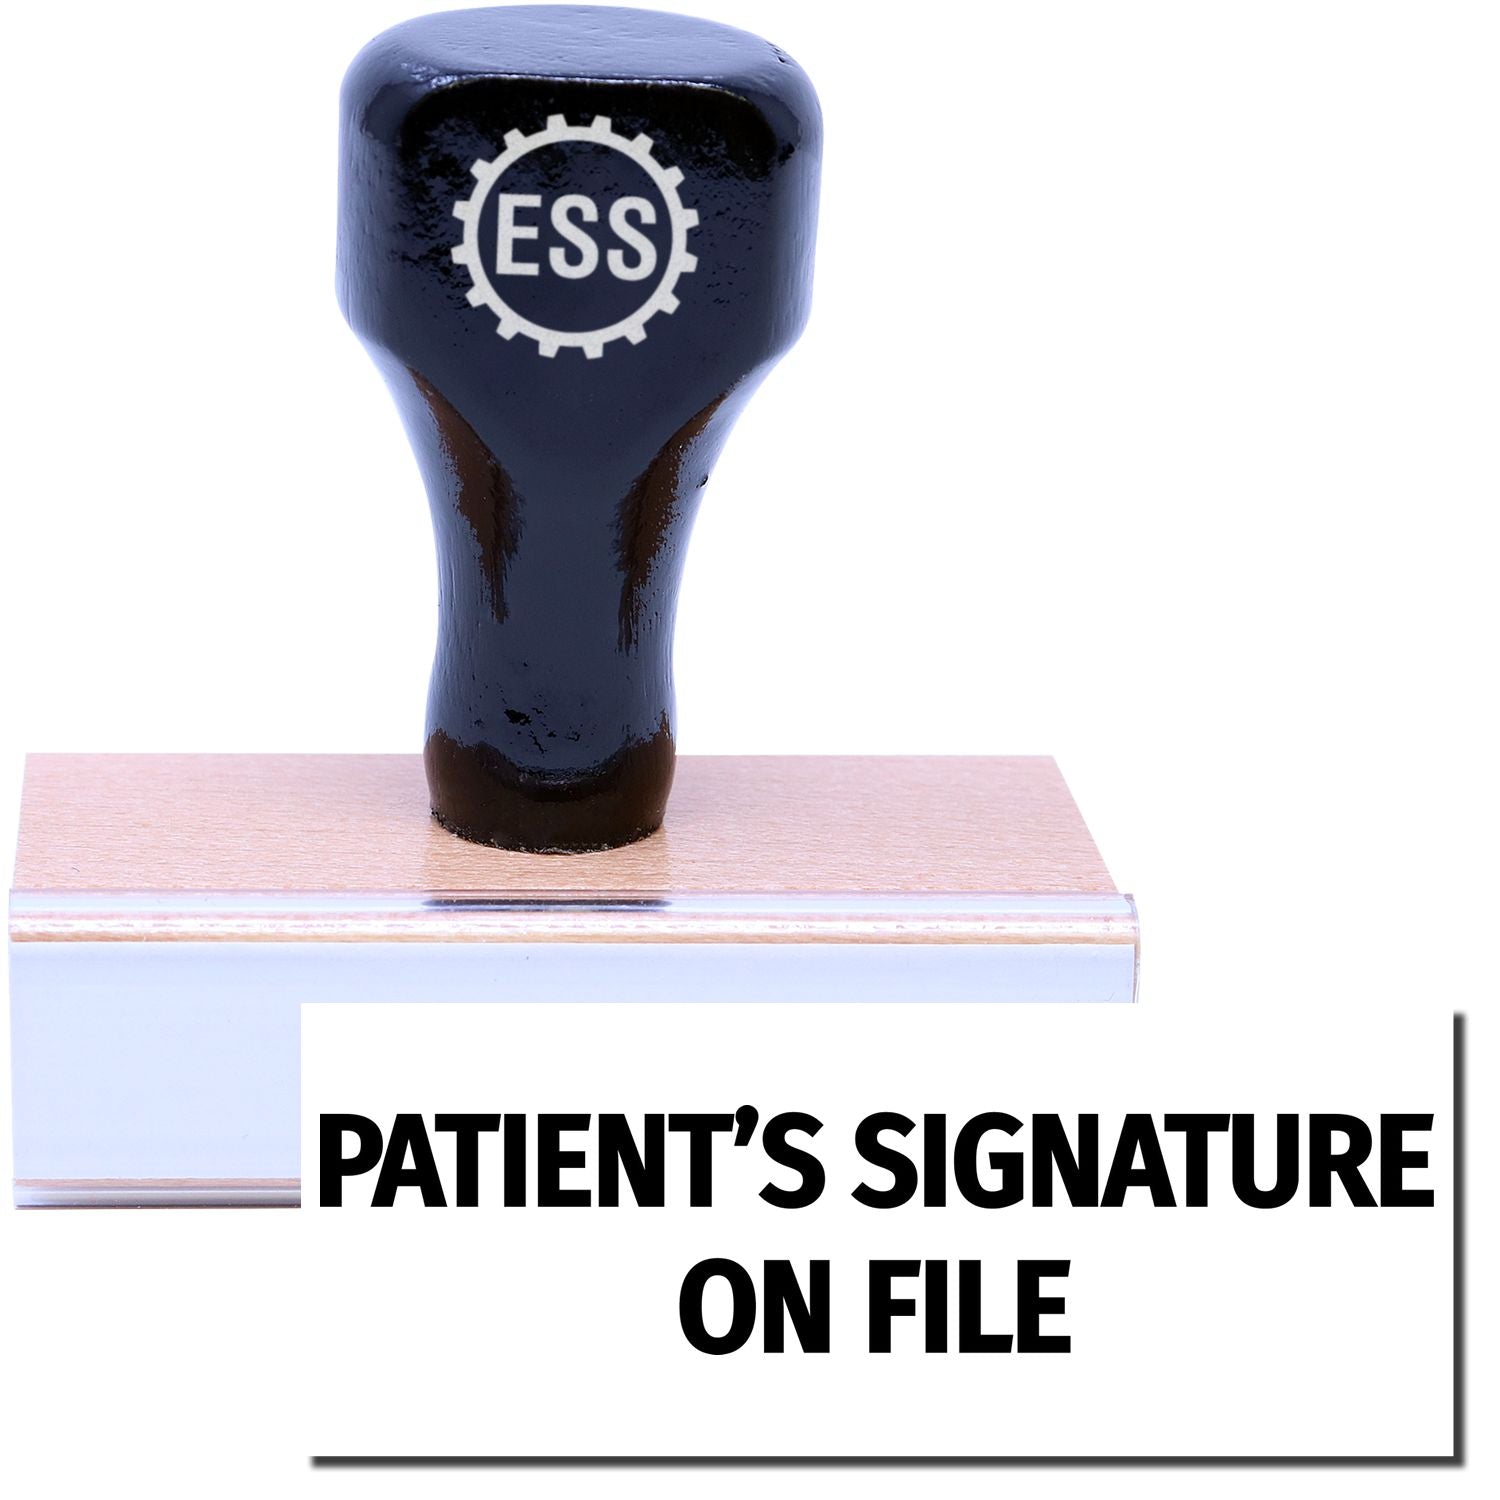 A stock office rubber stamp with a stamped image showing how the text "PATIENT'S SIGNATURE ON FILE" in a large font is displayed after stamping.